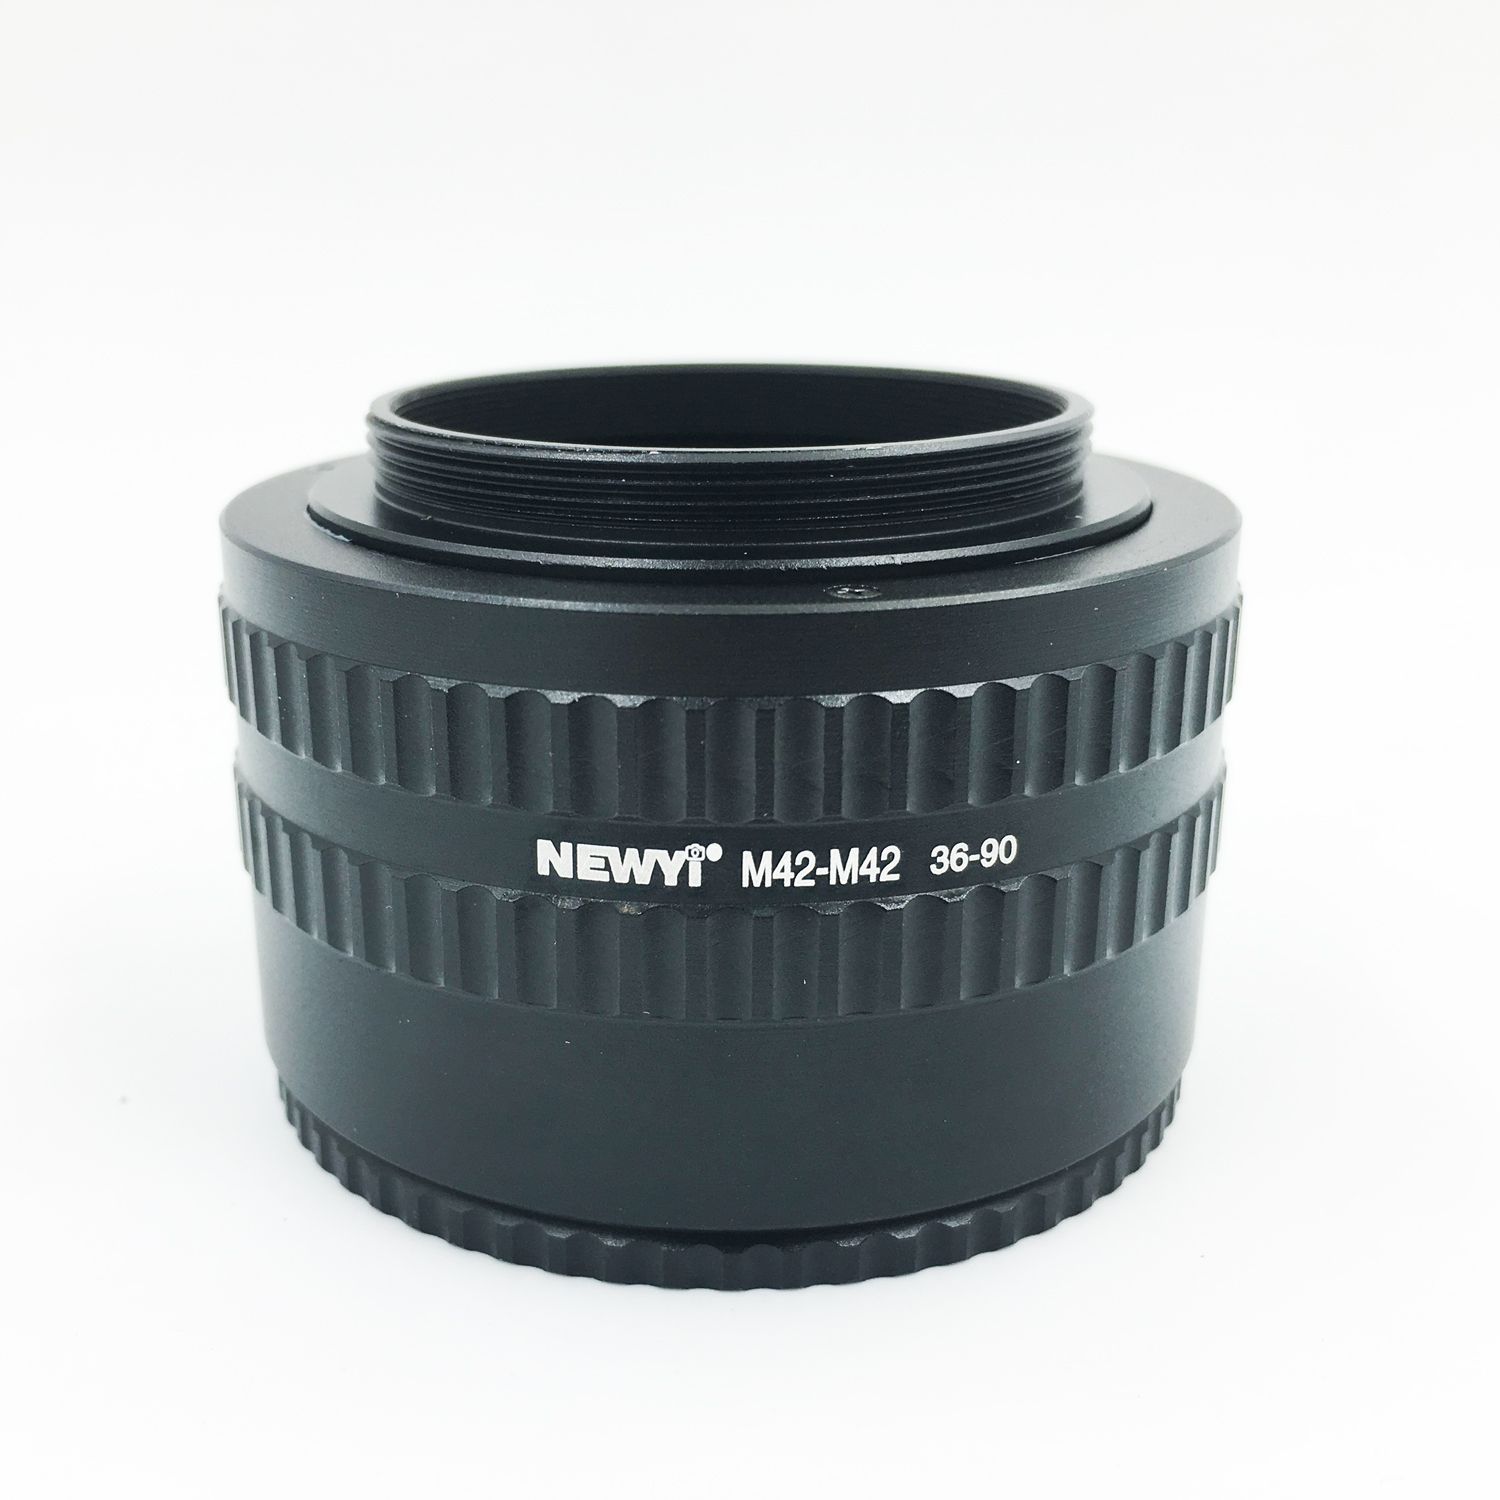 NEWYI-M42-M42-Mount-Lens-Adjustable-Focusing-Helicoid-36-90Mm-Macro-Extension-Adapter-Tube-Ring-1544859